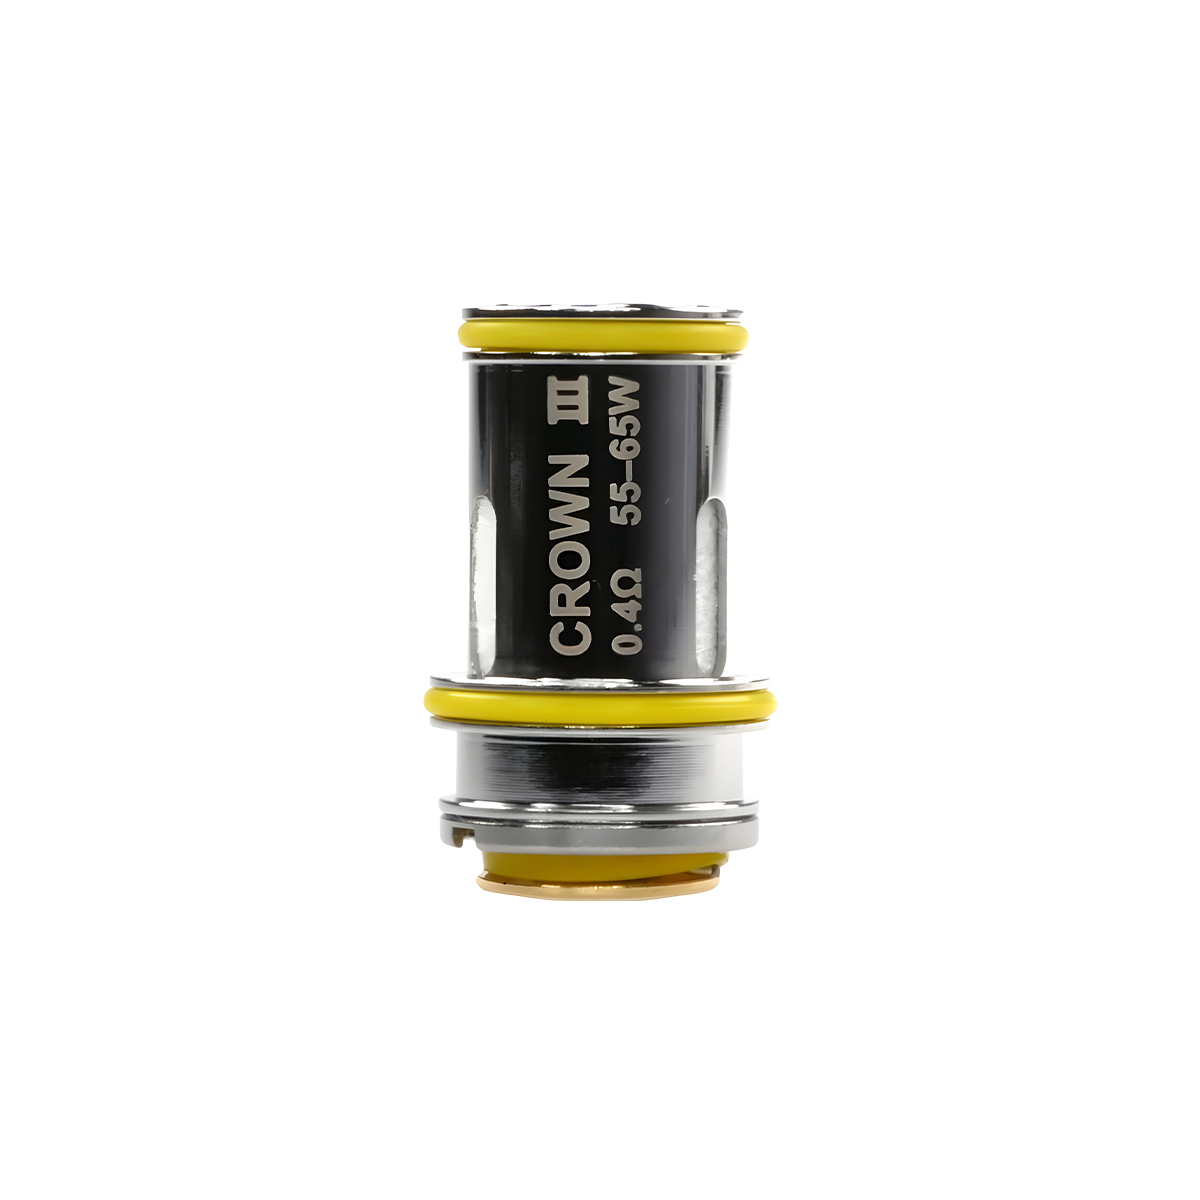 Uwell Crown 3 Replacement Coils 0.4 Ω  